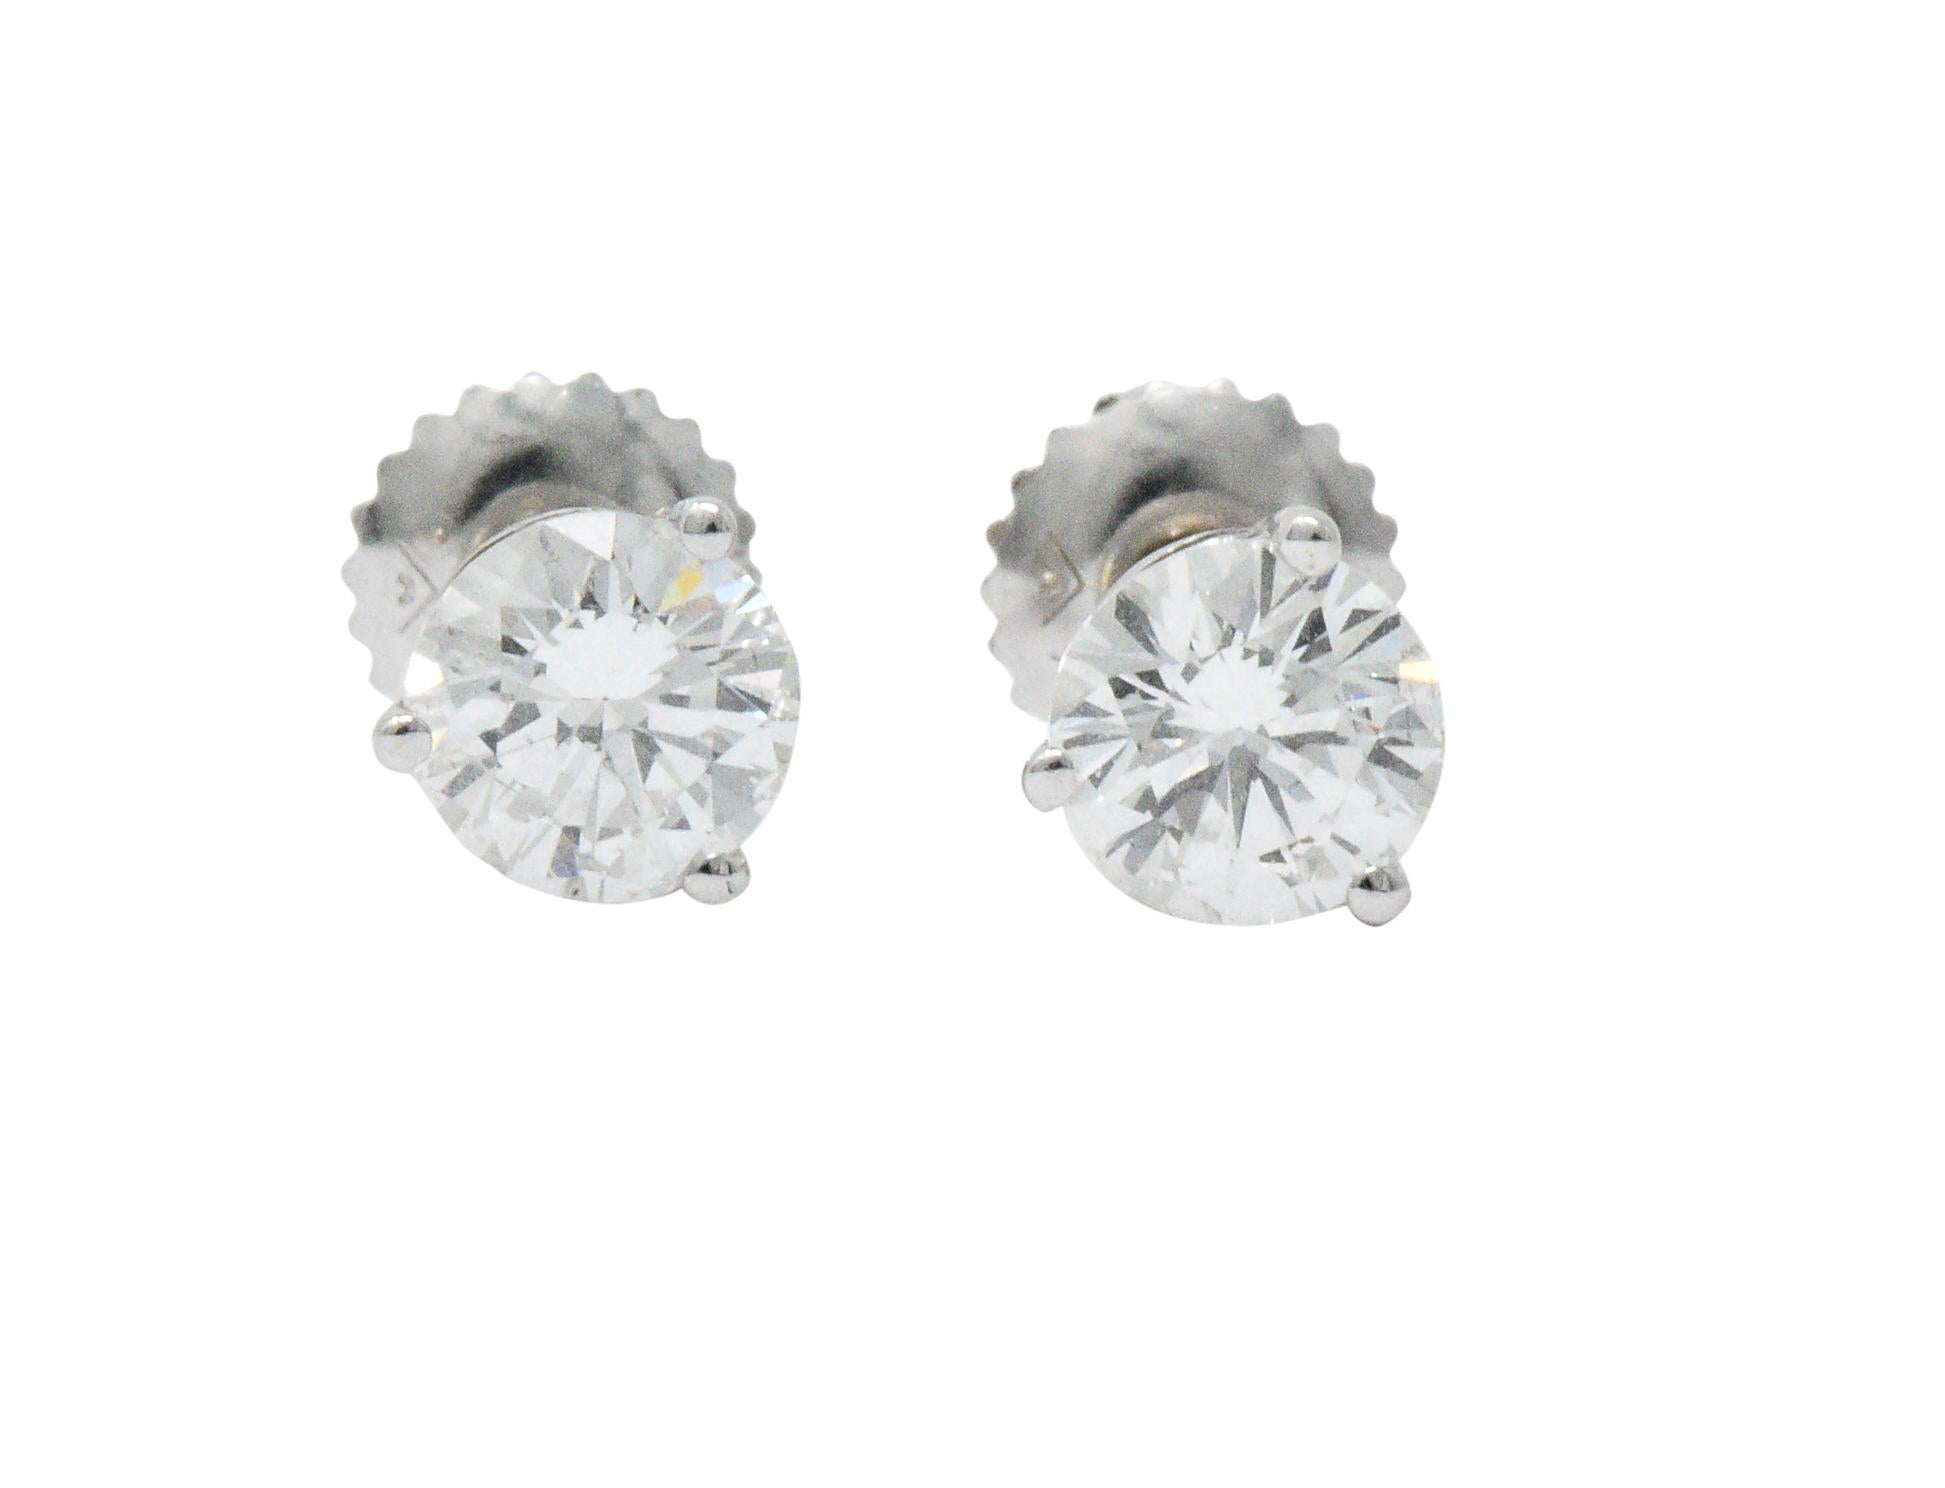 Featuring two round brilliant cut diamonds weighing in total approximately 1.20 carats, I/J color with SI clarity

Set by three prongs as a martini basket style stud earring

Completed by threaded posts and screw backs

Tested as 18 karat